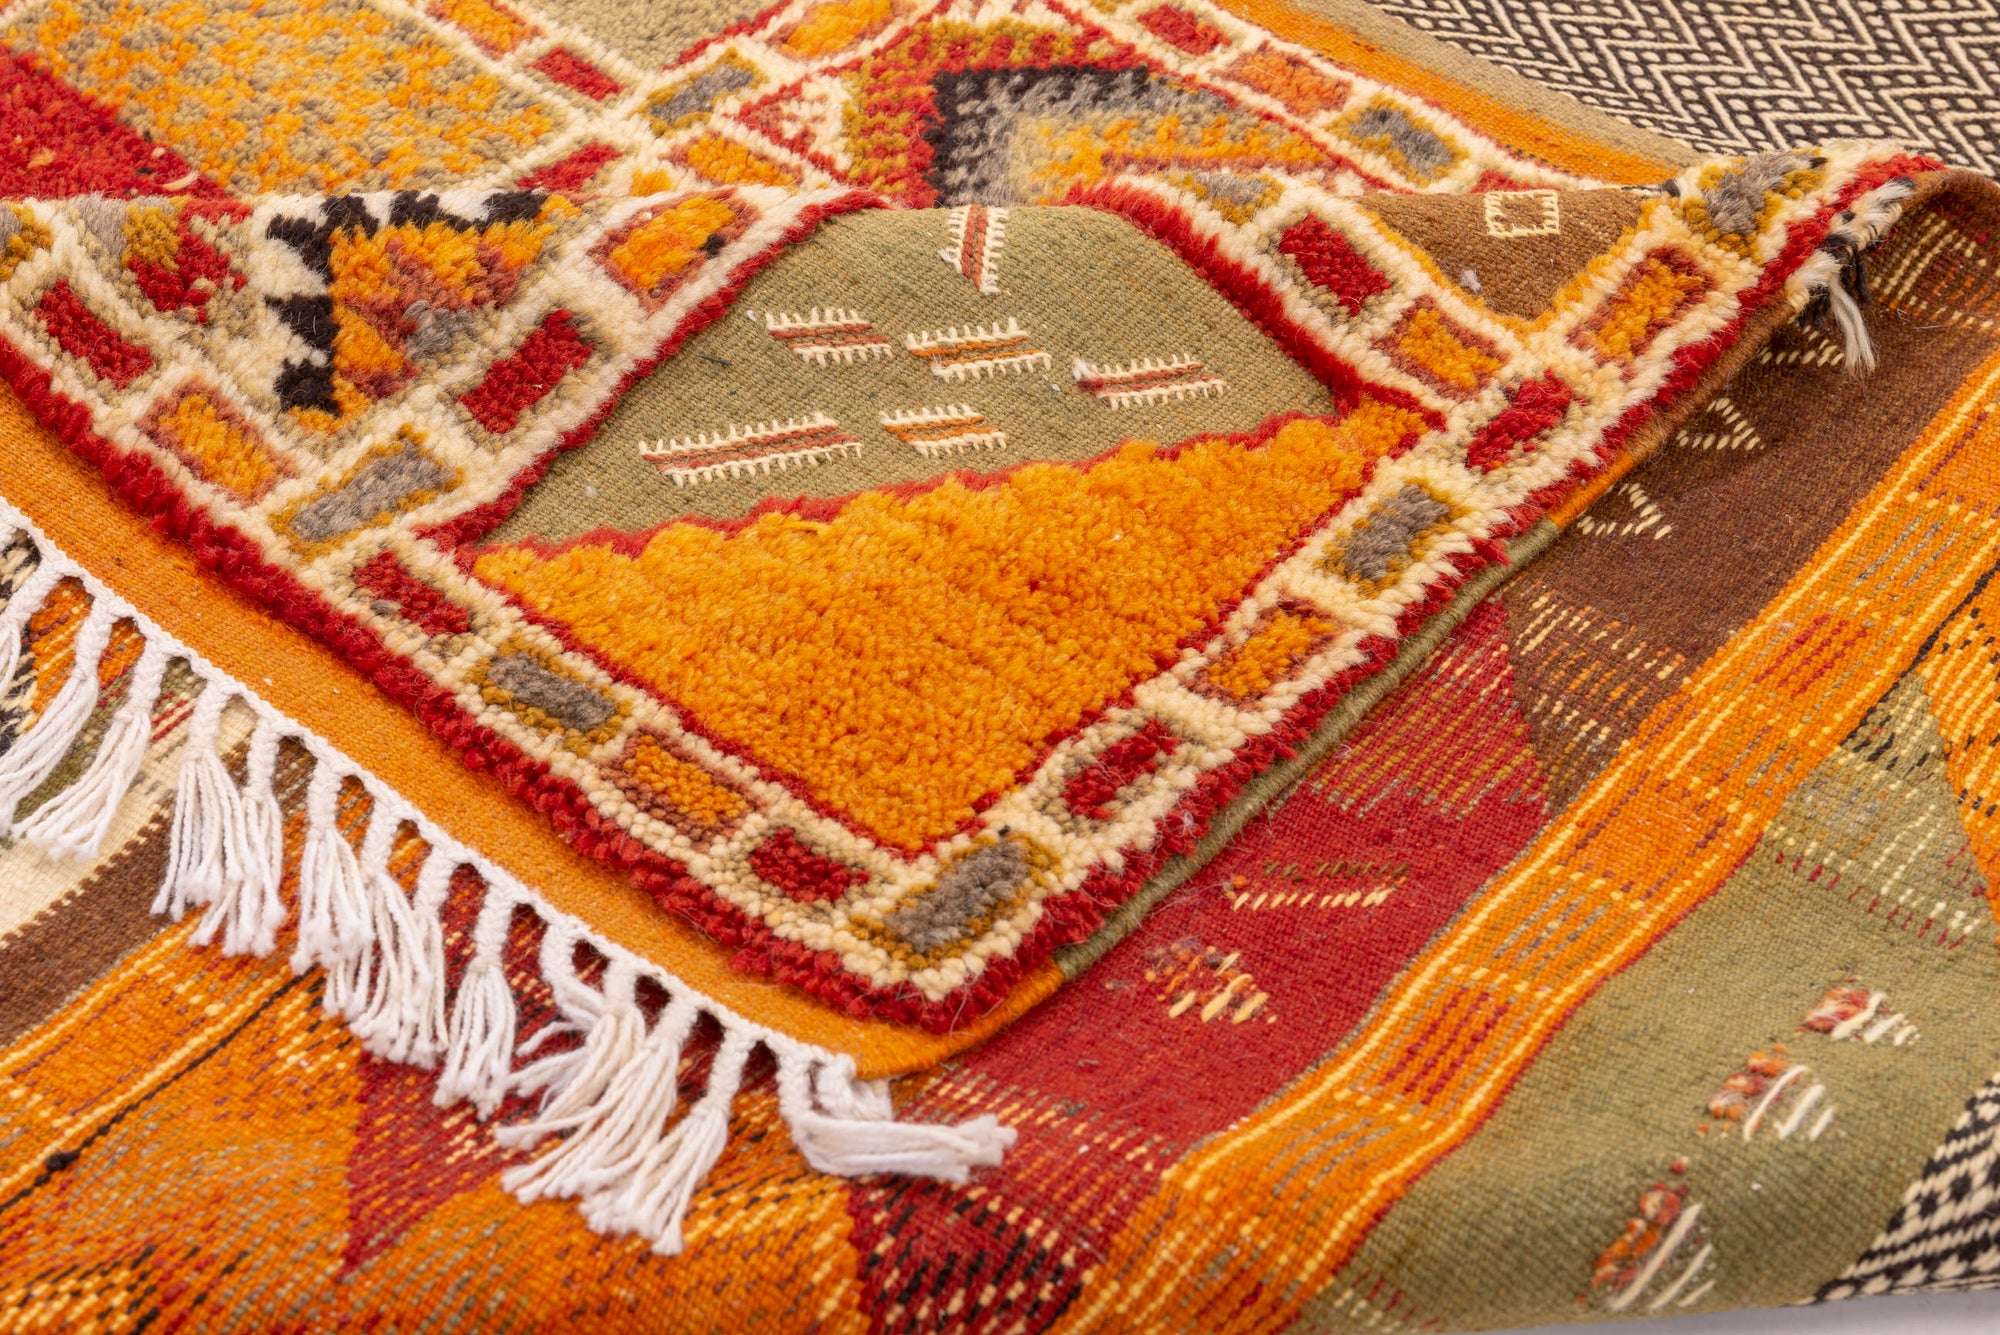 Ignite your space with our Sienna Spark Glawi Rug. This classic Glawi-style masterpiece boasts a warm yellowish-orange tone and a captivating geometric square pattern. Elevate your decor with the timeless beauty and craftsmanship of this unique rug, bringing a touch of tradition and artistry to your home.